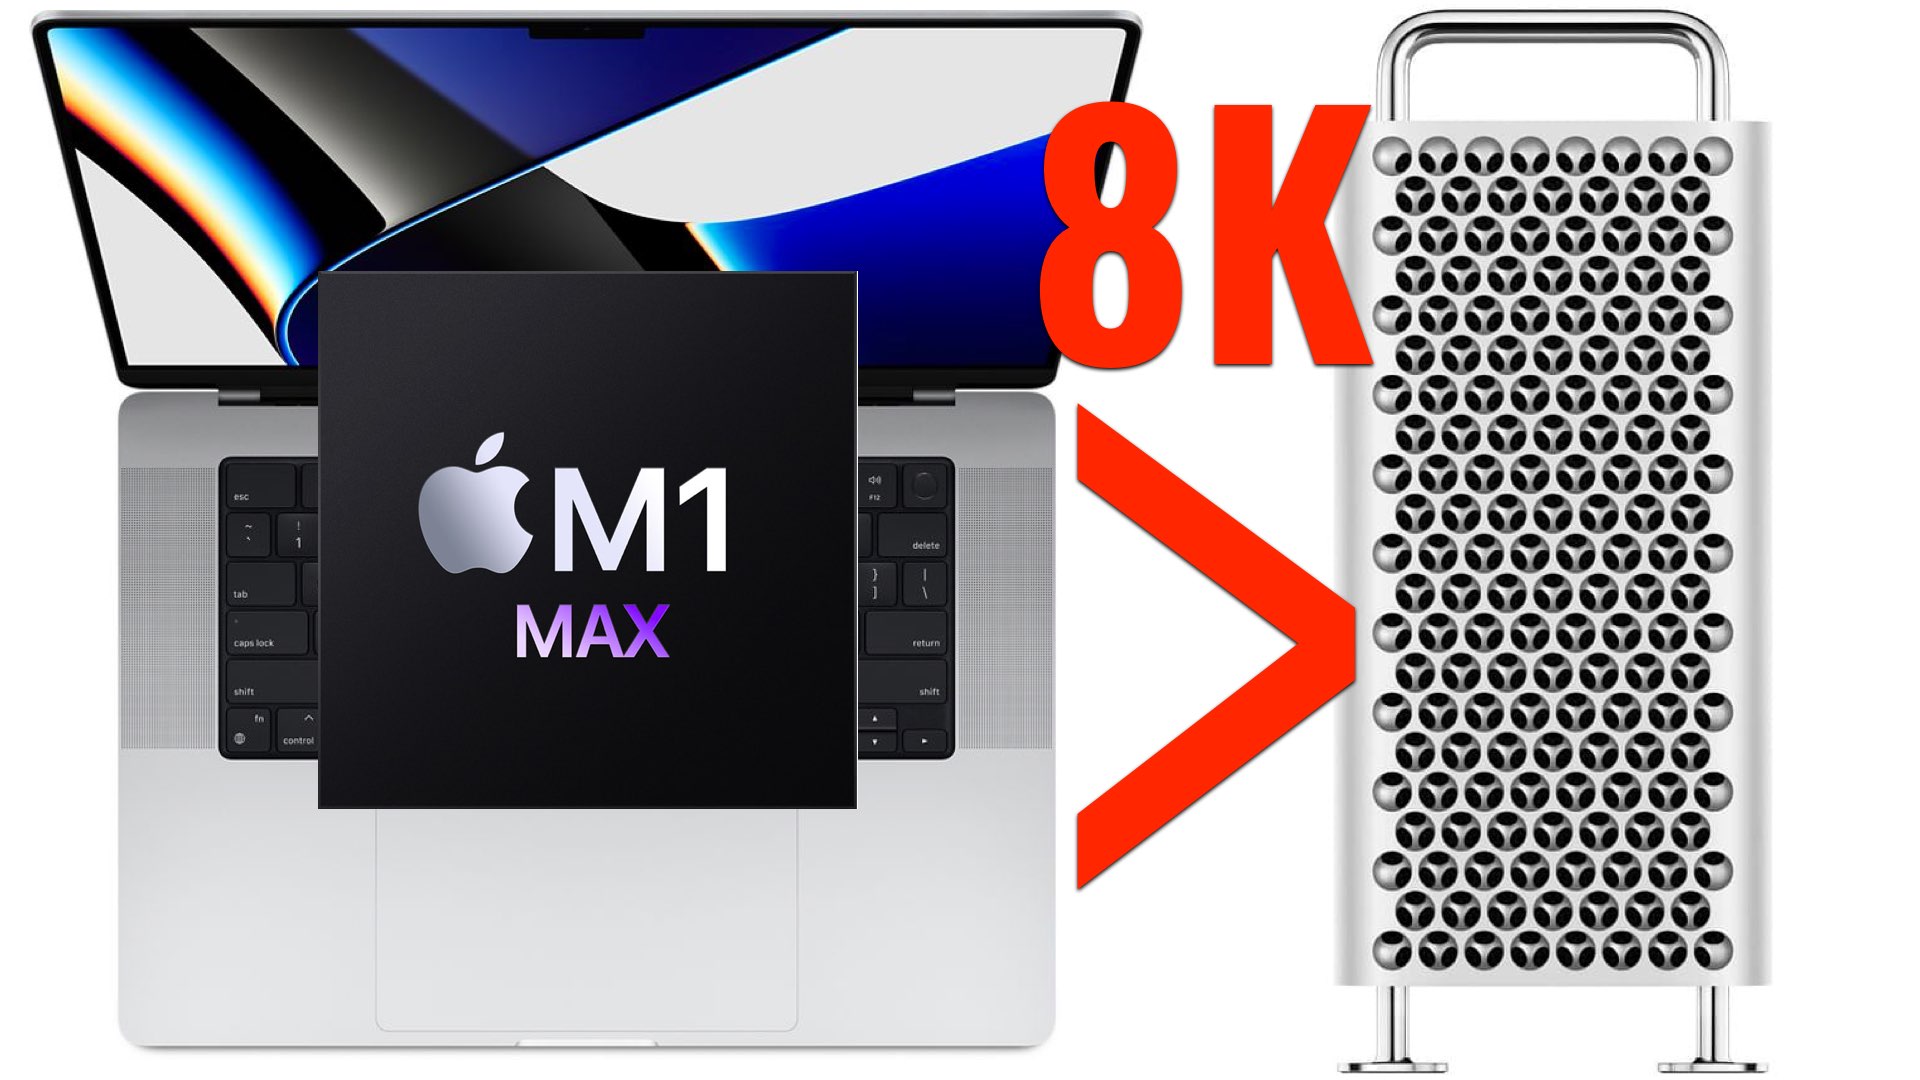 The new MacBook Pro is More Powerful for 8K Editing Than the Mac Pro